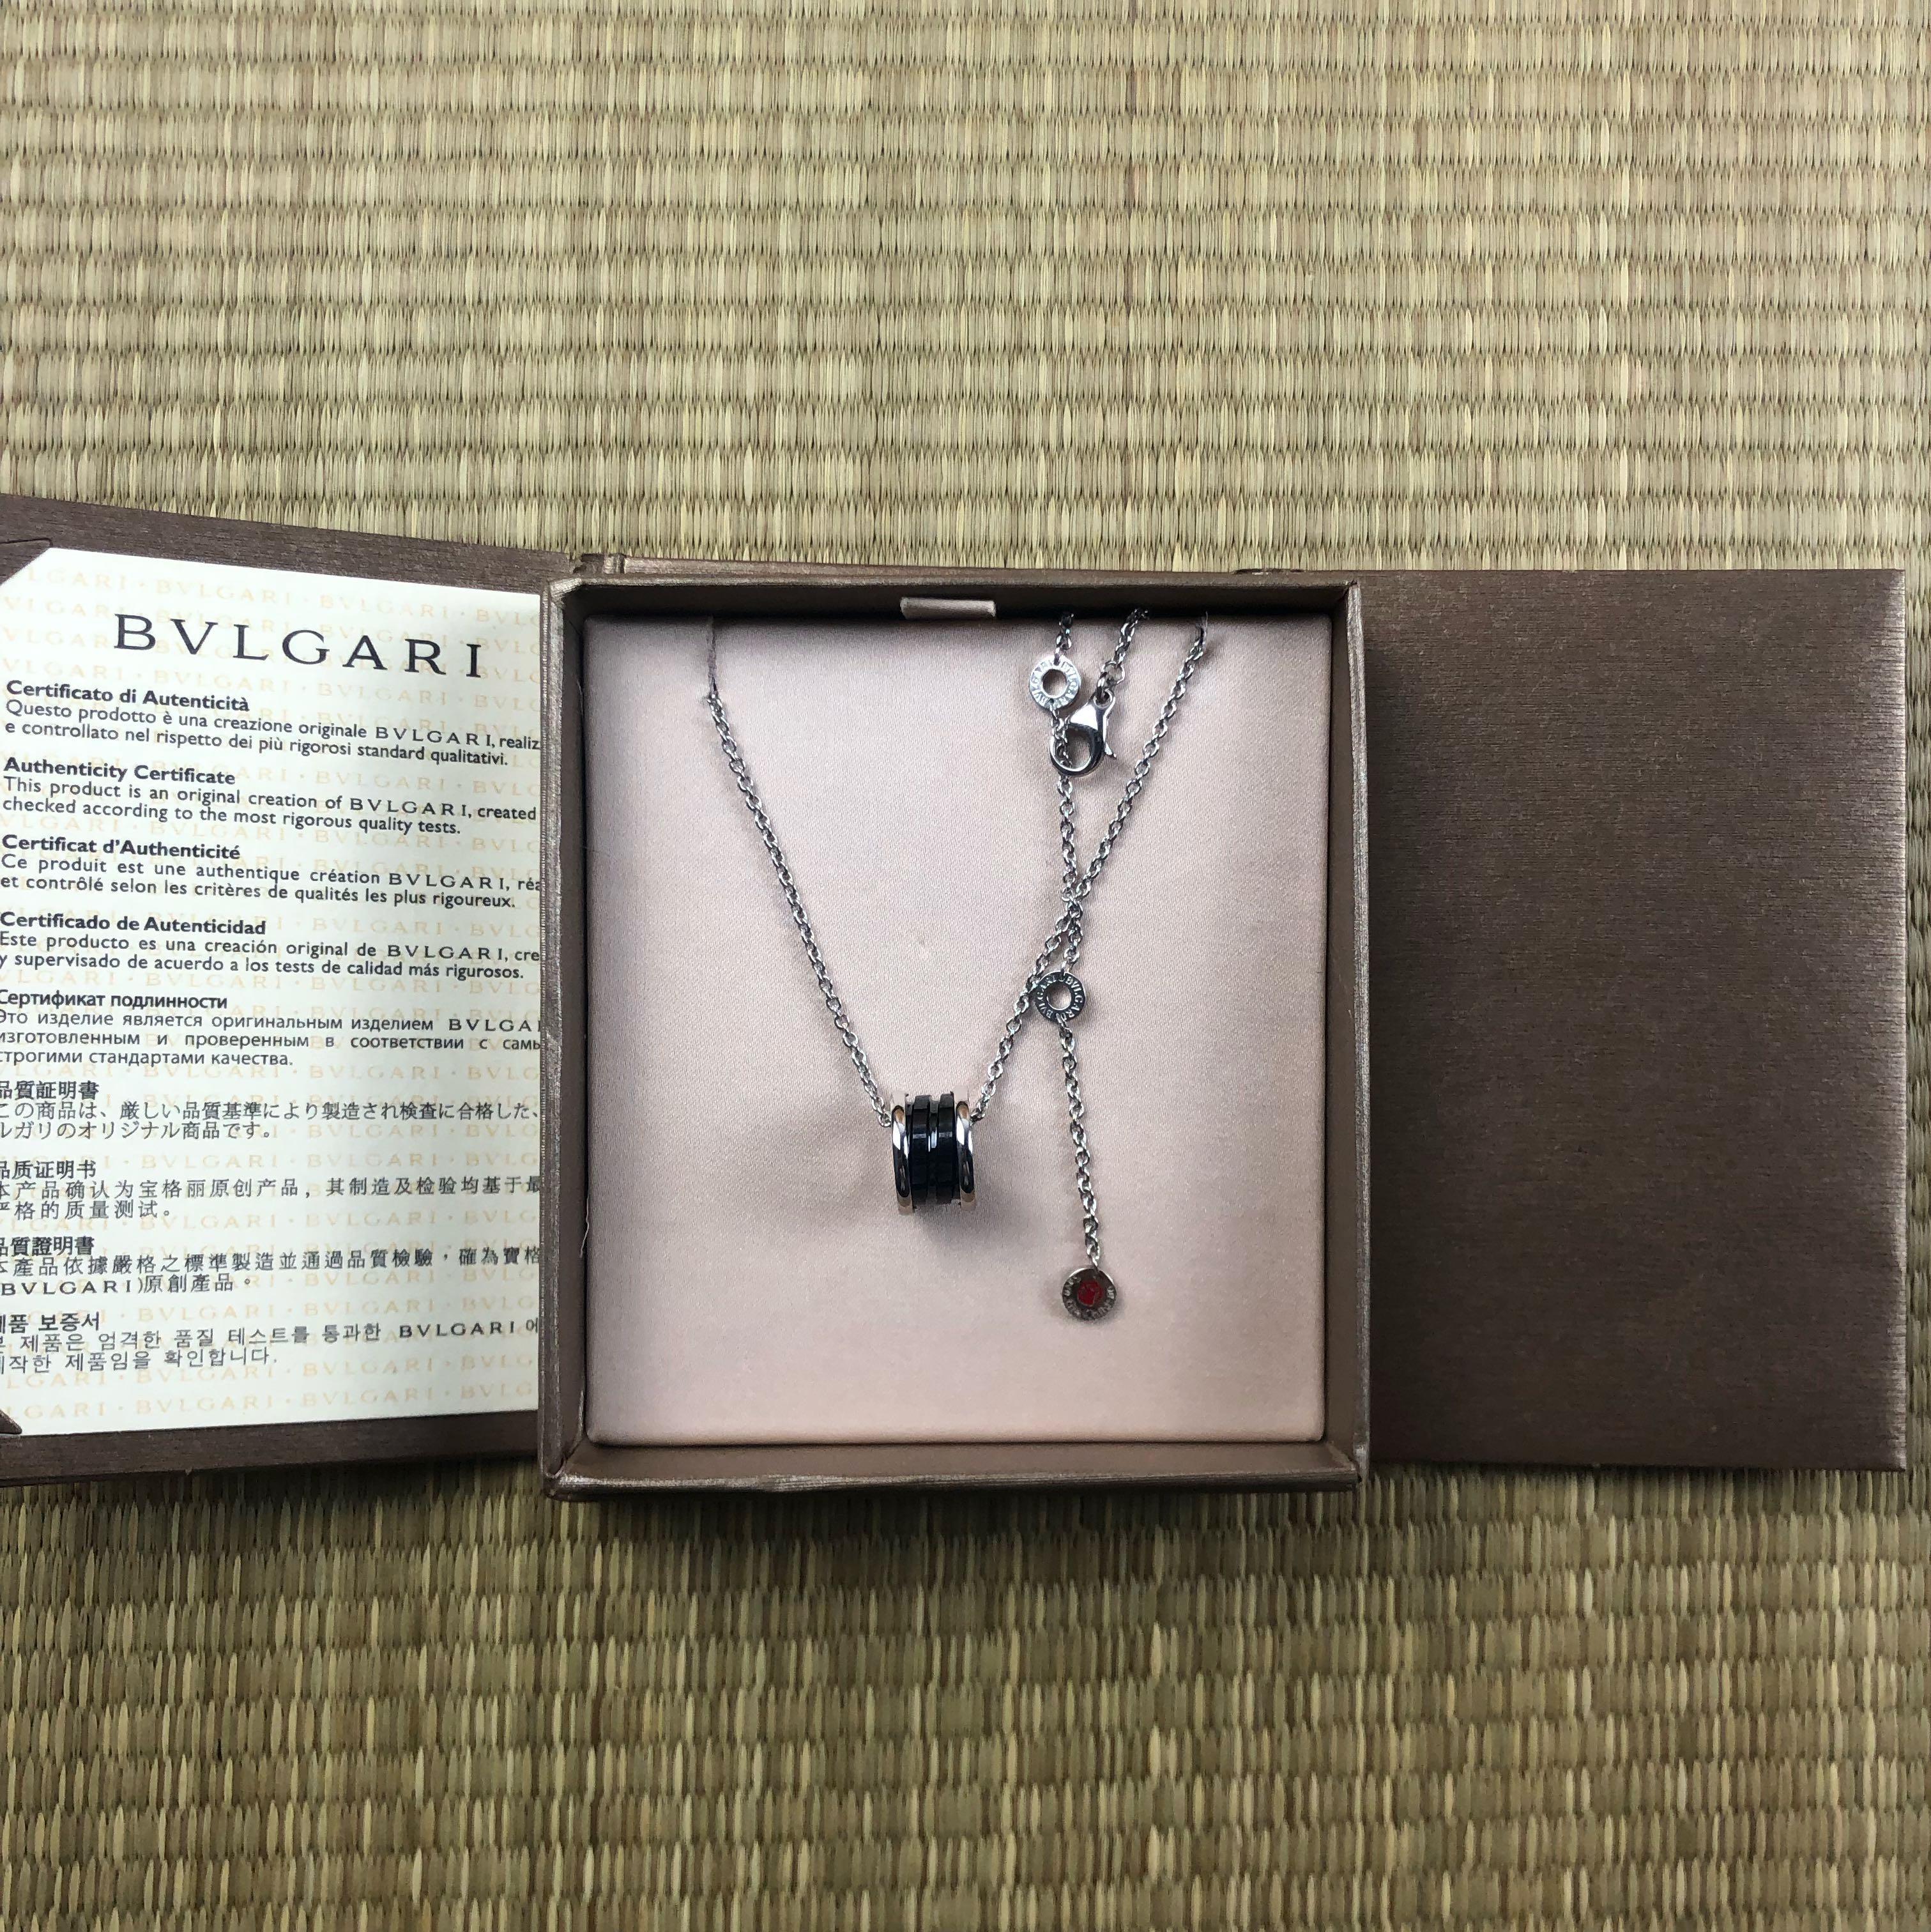 bvlgari save the child necklace review